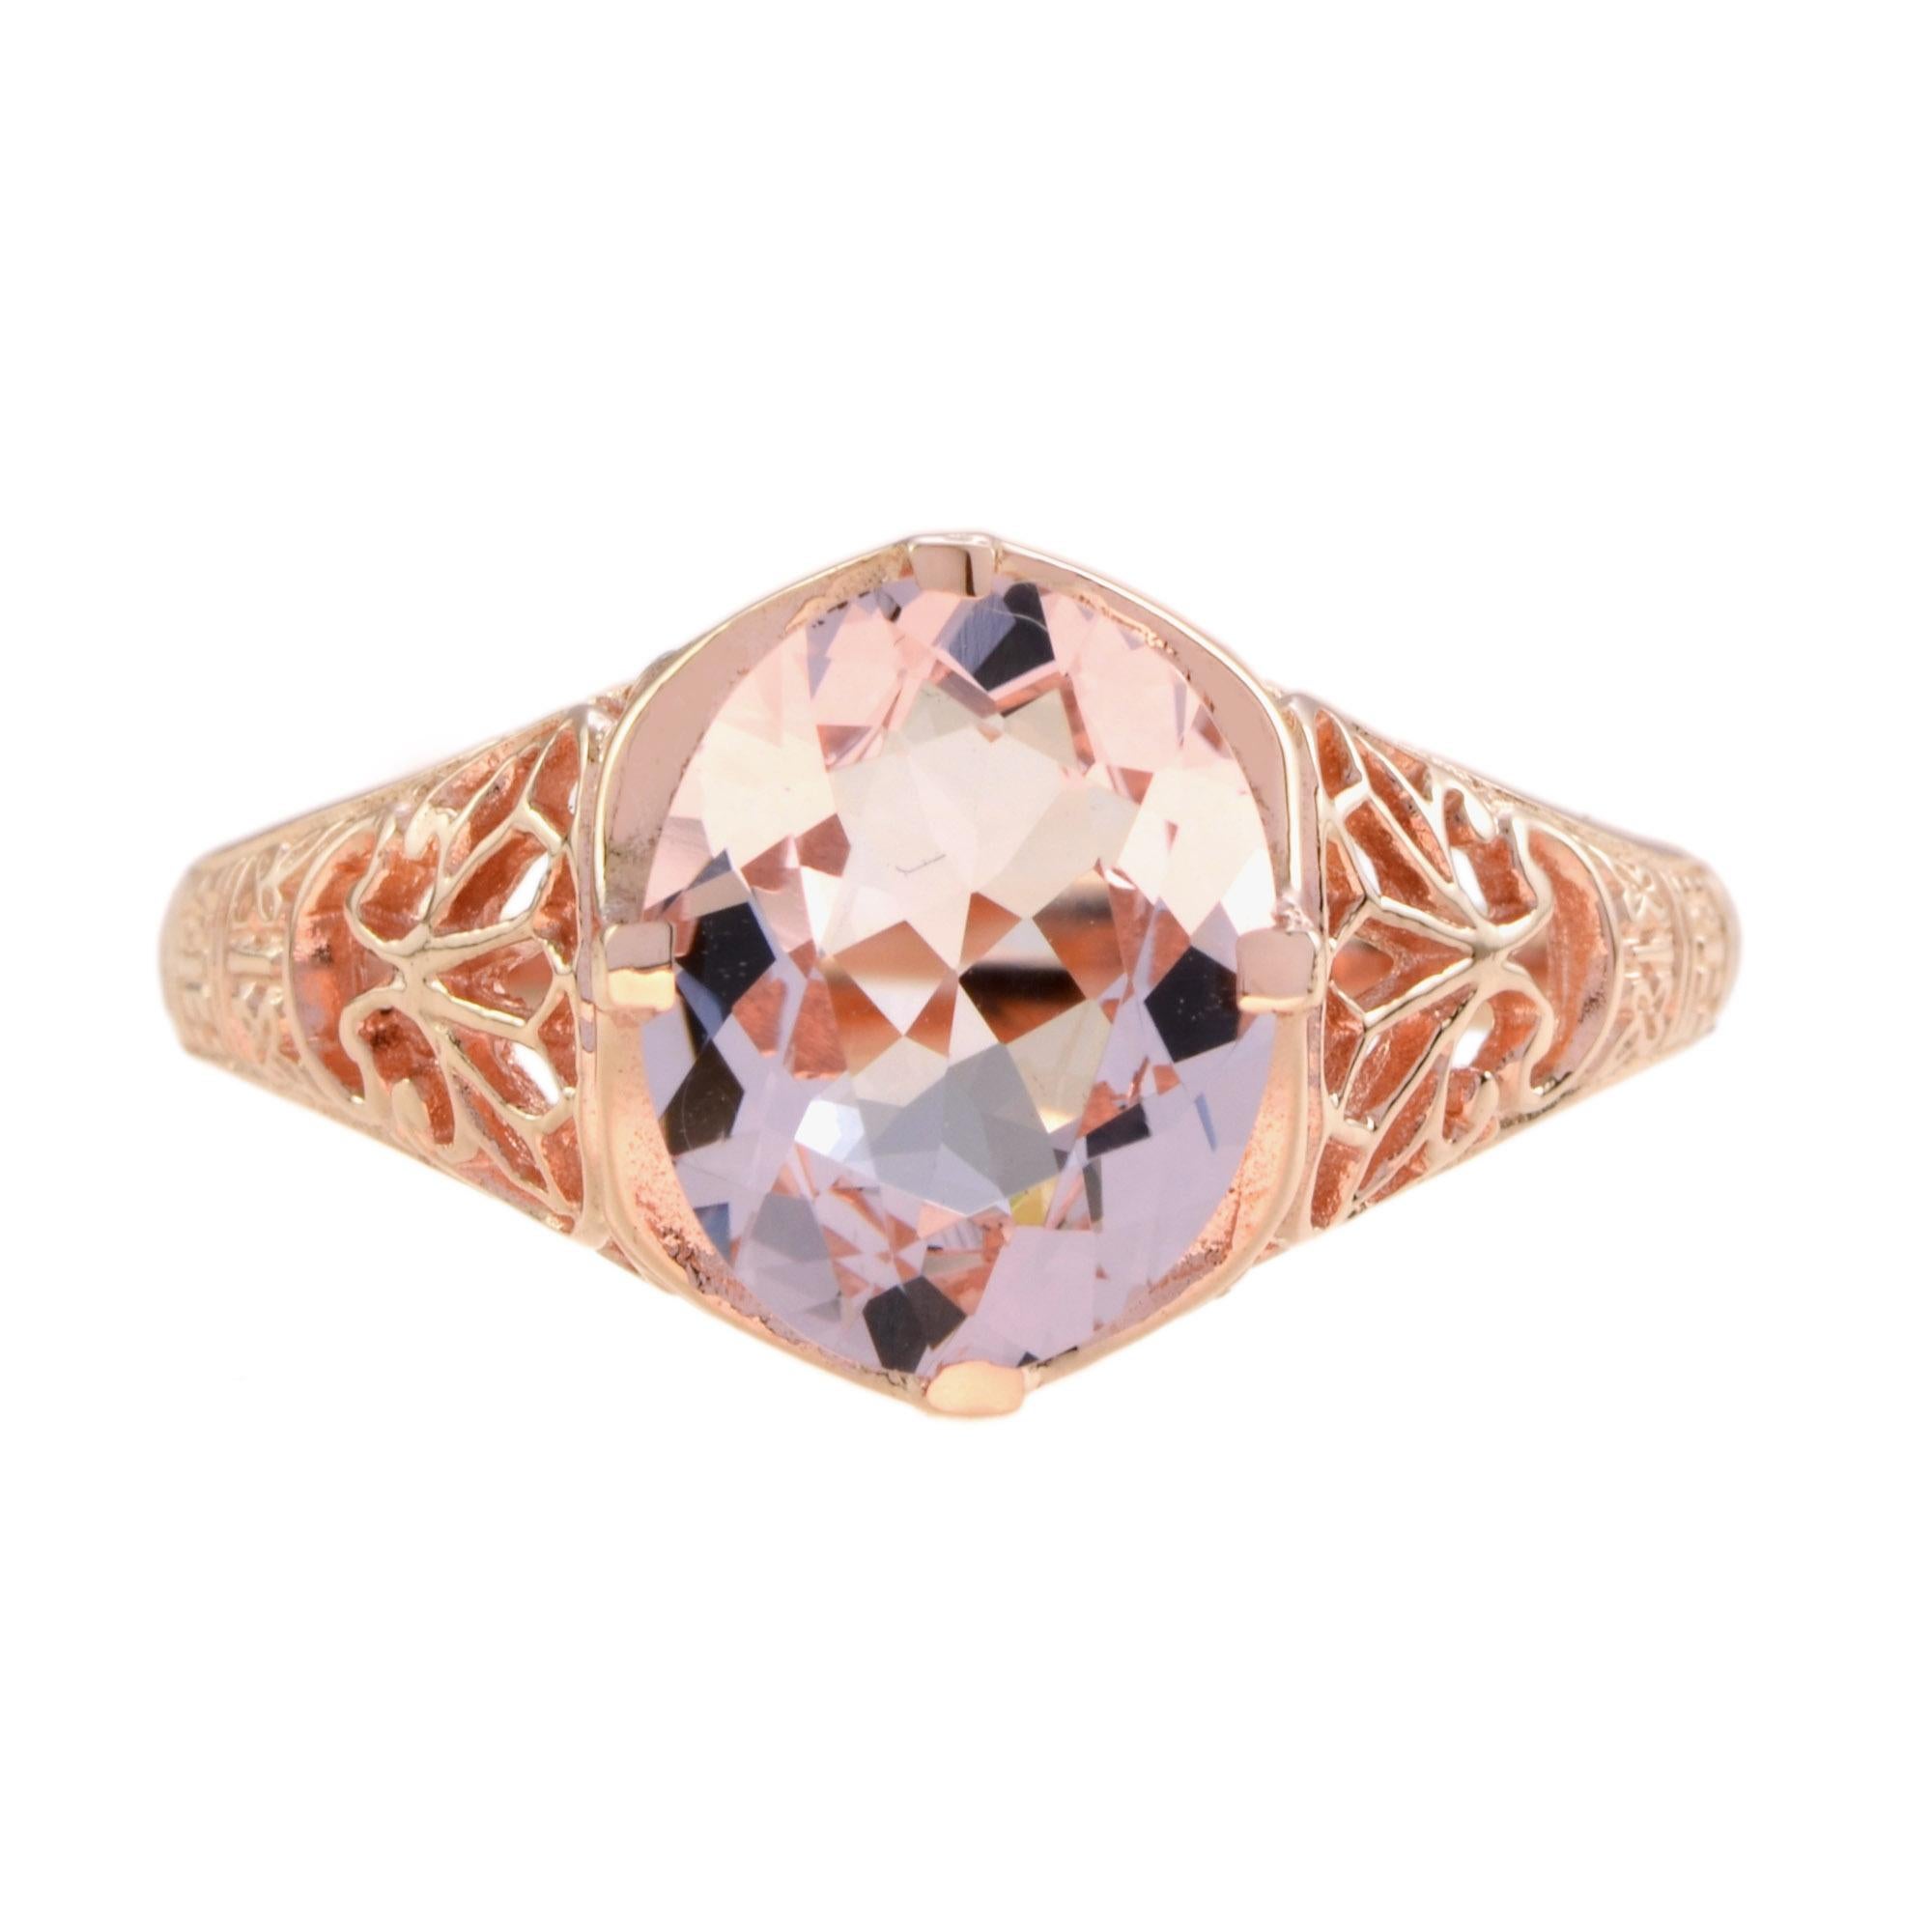 This romantic vintage style filigree morganite engagement ring features a shimmering oval peach pink morganite gemstone of 2.10 carat, nestle in a secure 4 prong setting atop a delicate trellis of 9k rose gold filigree. 

Ring Information
Style: